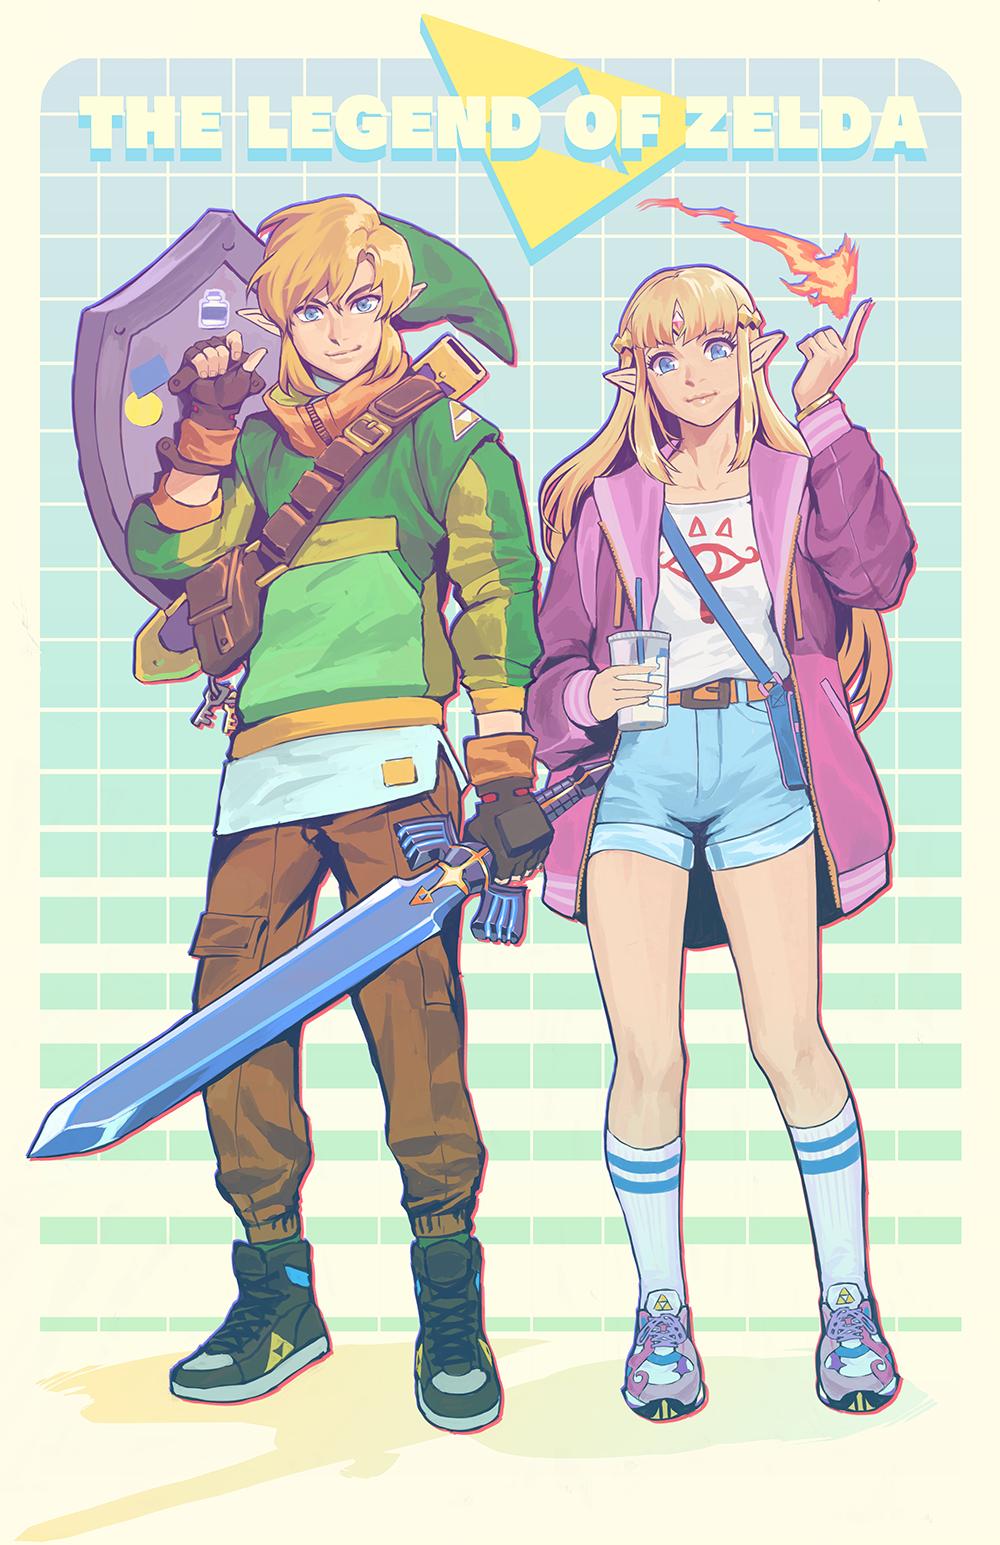 botw link & zelda in mordern outfits 🥰haven't drawn them in a